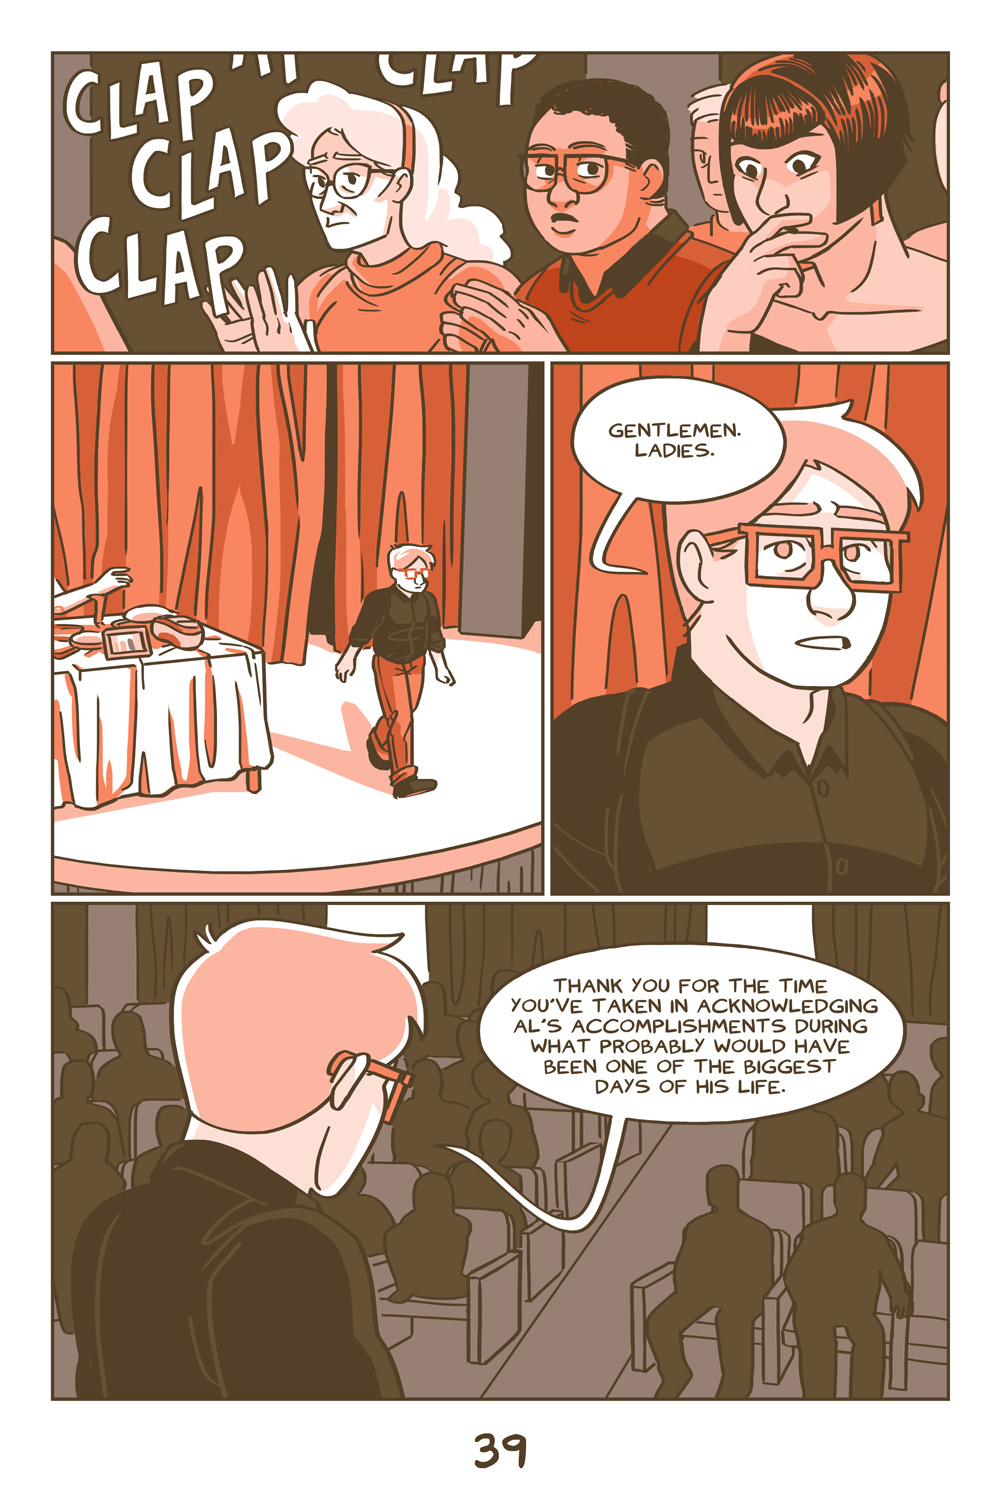 Chapter 5, Page 39